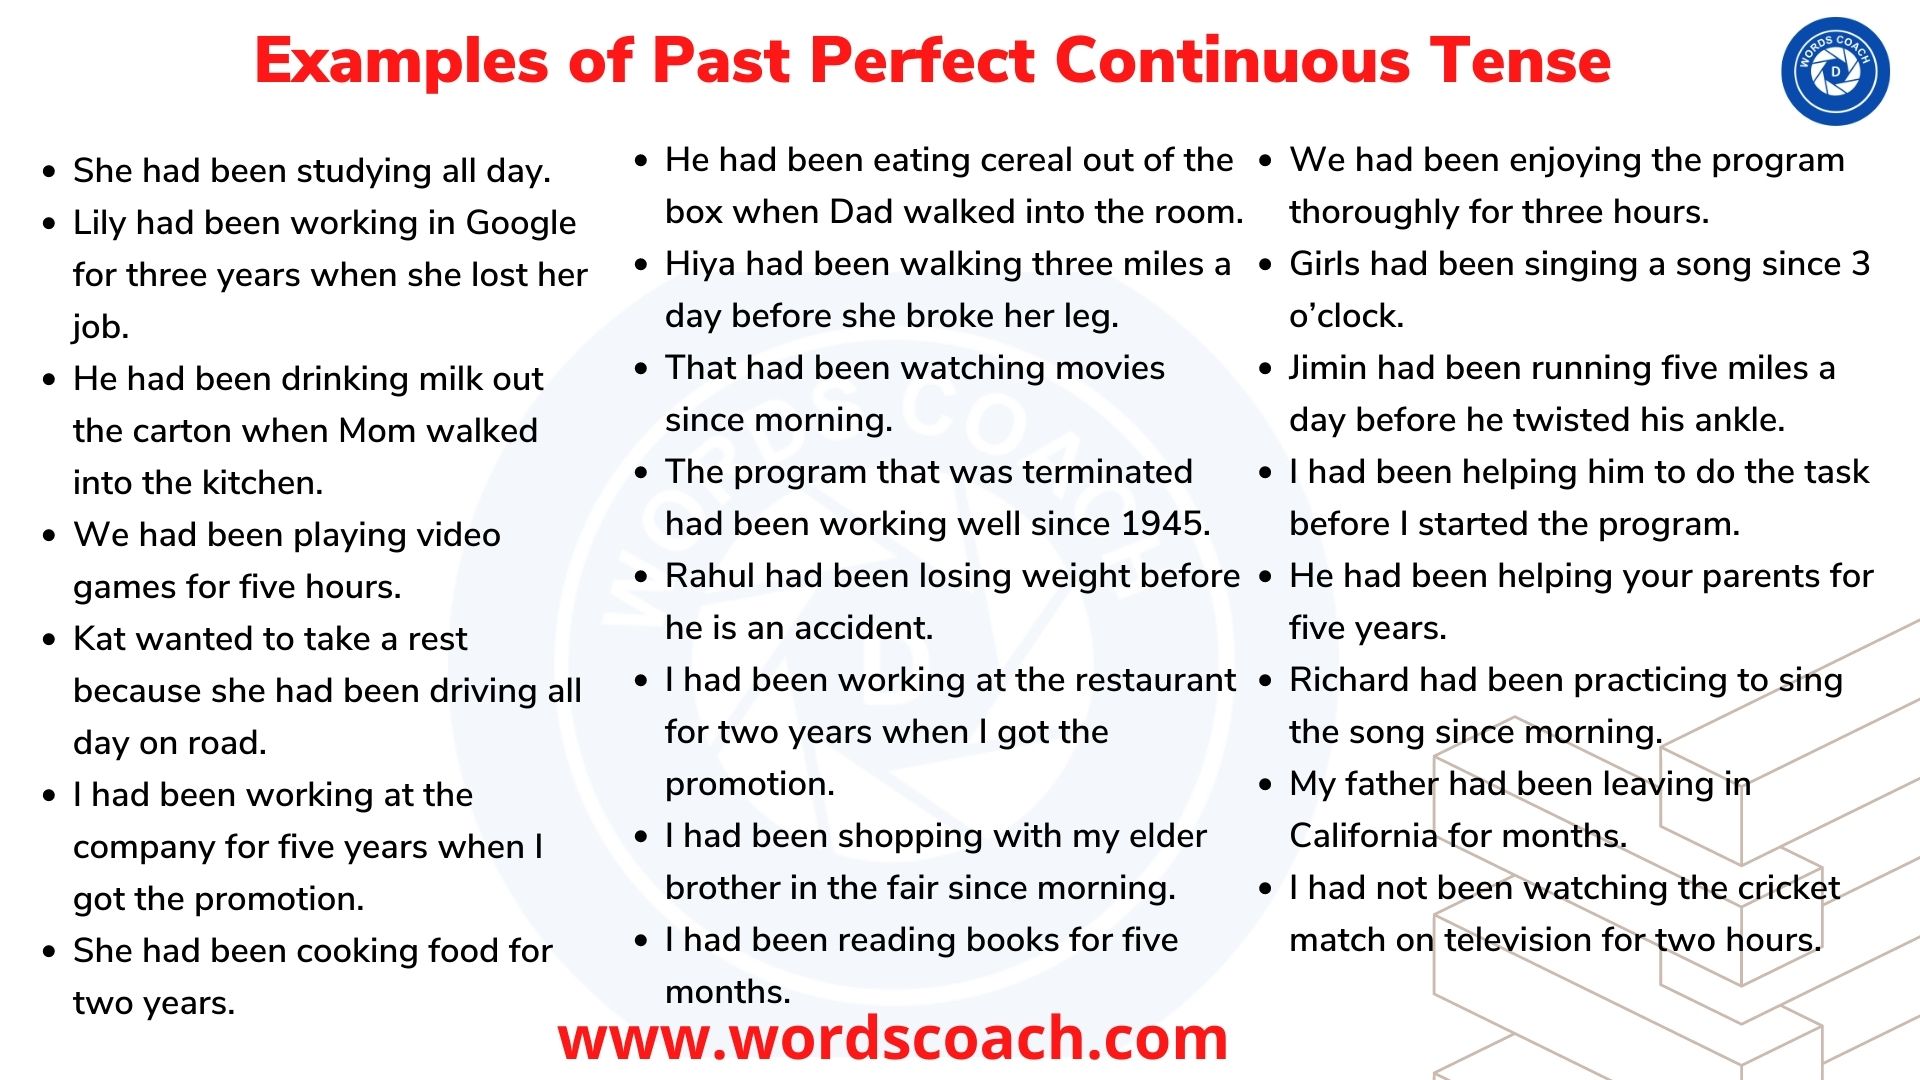 Examples of Past Perfect Continuous Tense - wordscoach.com